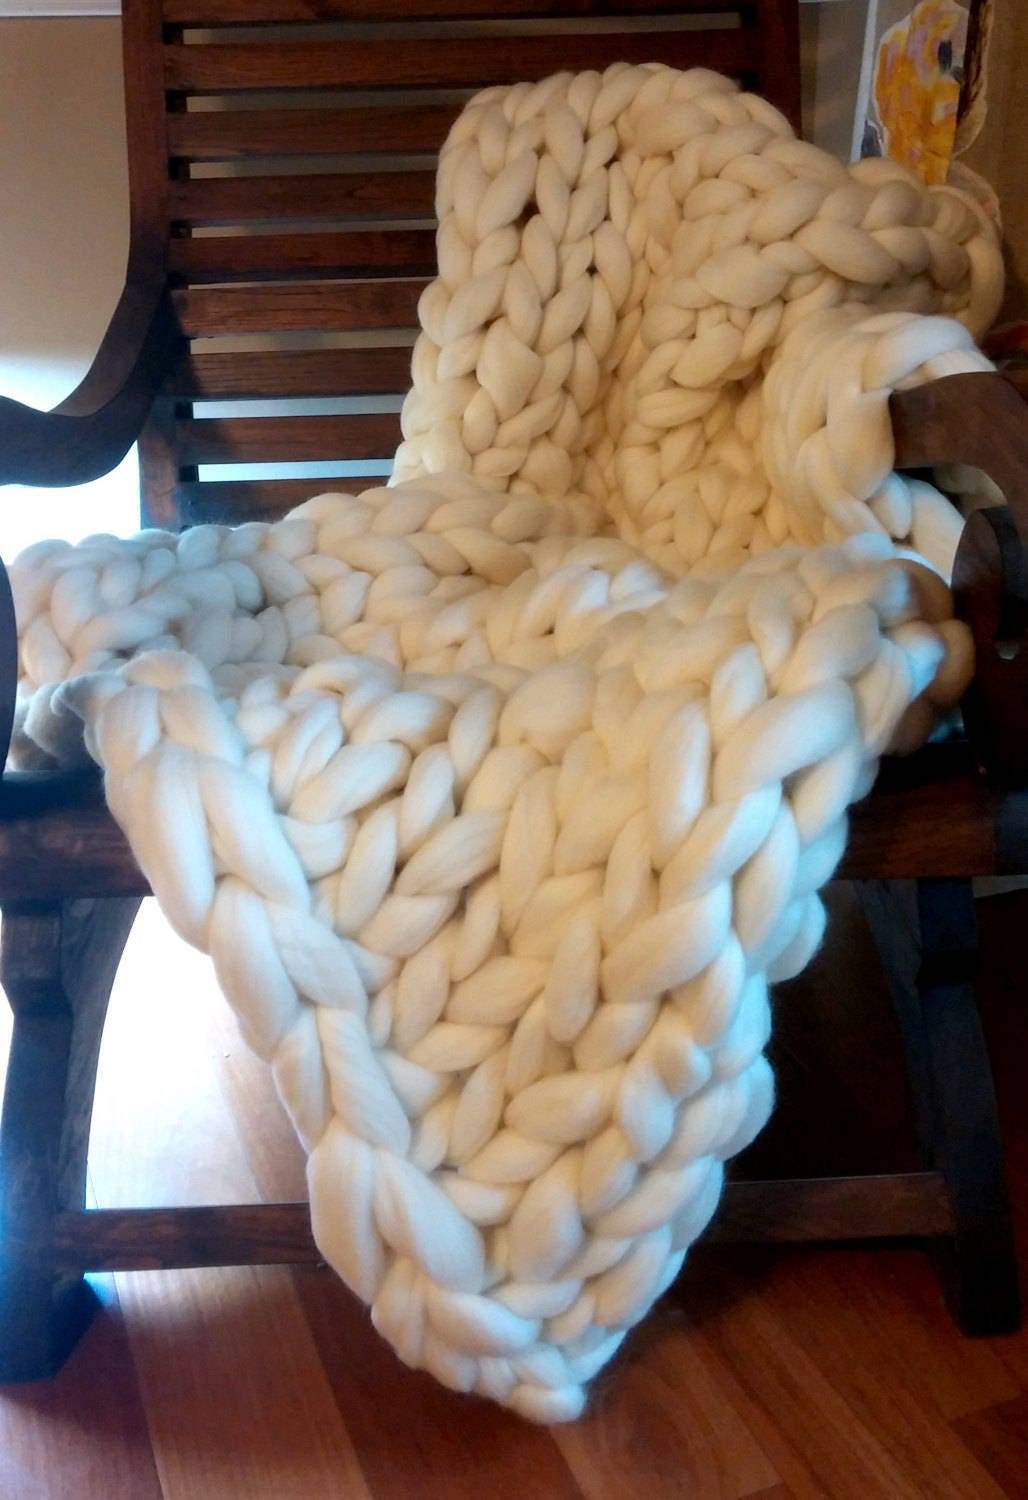 Chunky Hand-Knit bed throw, Chunky Knit Blanket, Chunky Knit Merino Wool Blanket Large 40" x 60" Throw Blanket, Giant Knit Blanket